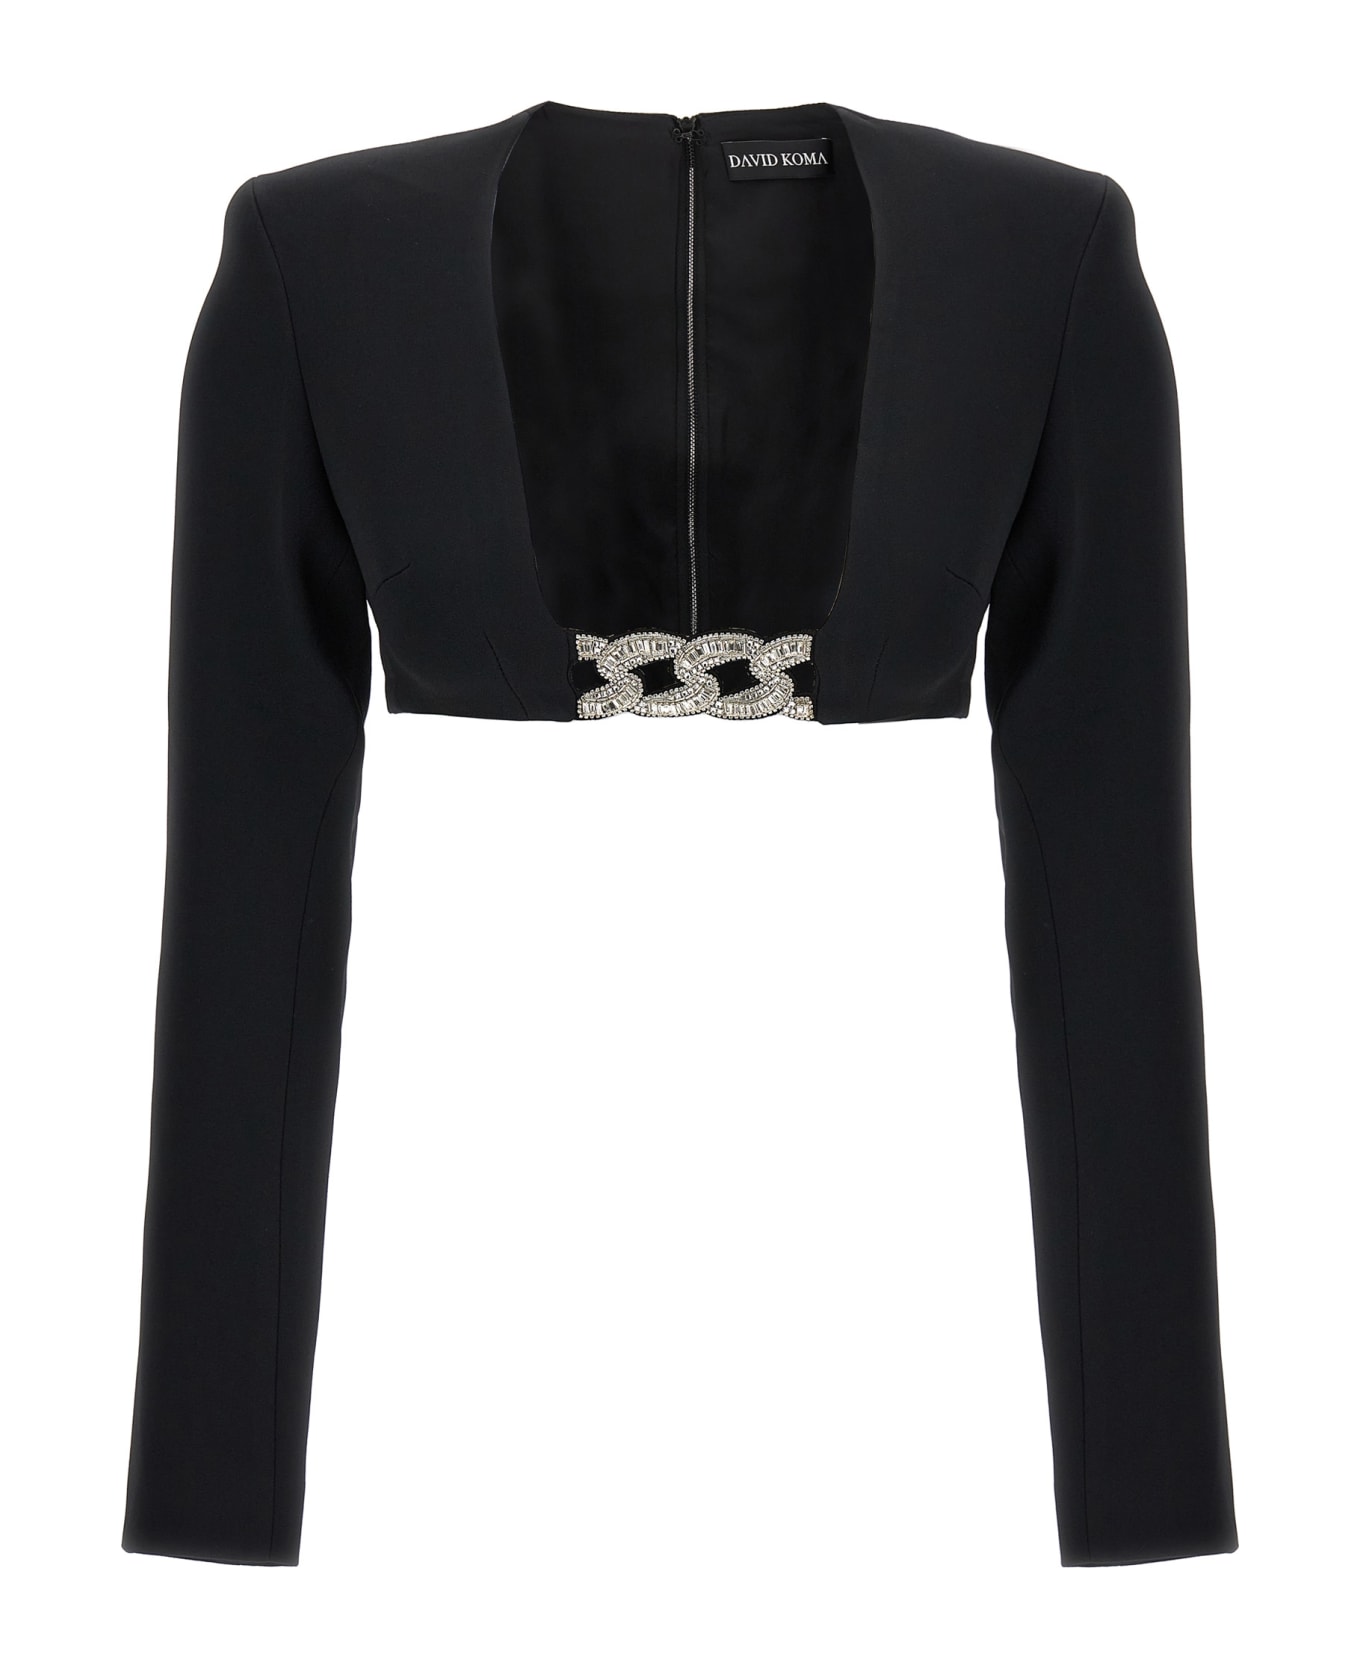 David Koma Top '3d Crystsal Chain And Square Neck' - Black  